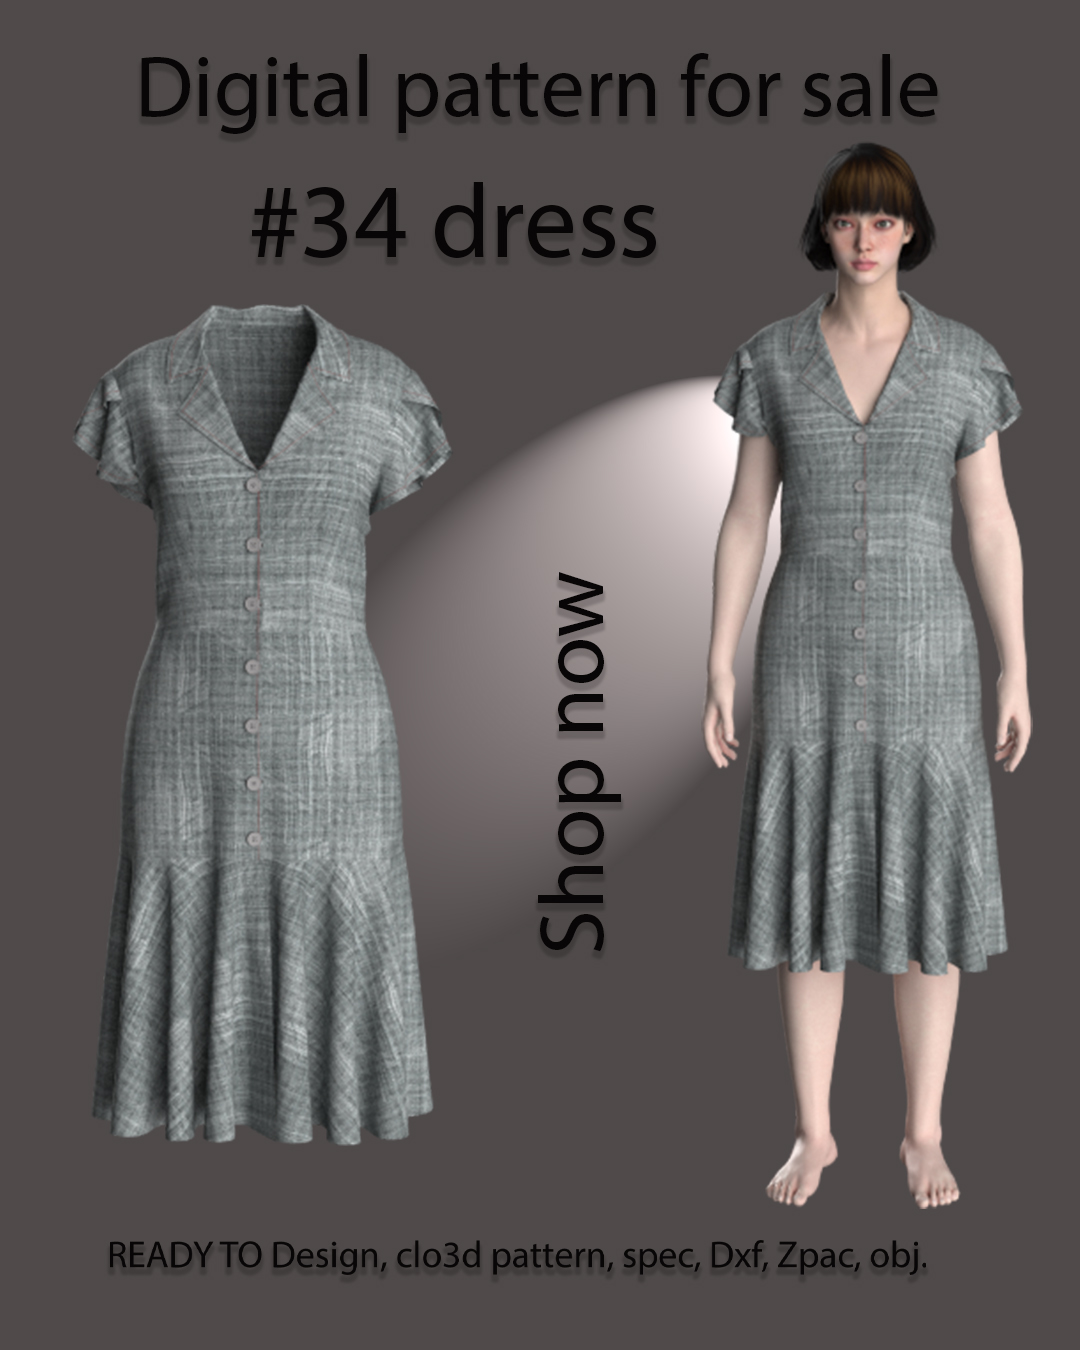 New dress pattern that I'm smitten with! - Kelly Rae Roberts